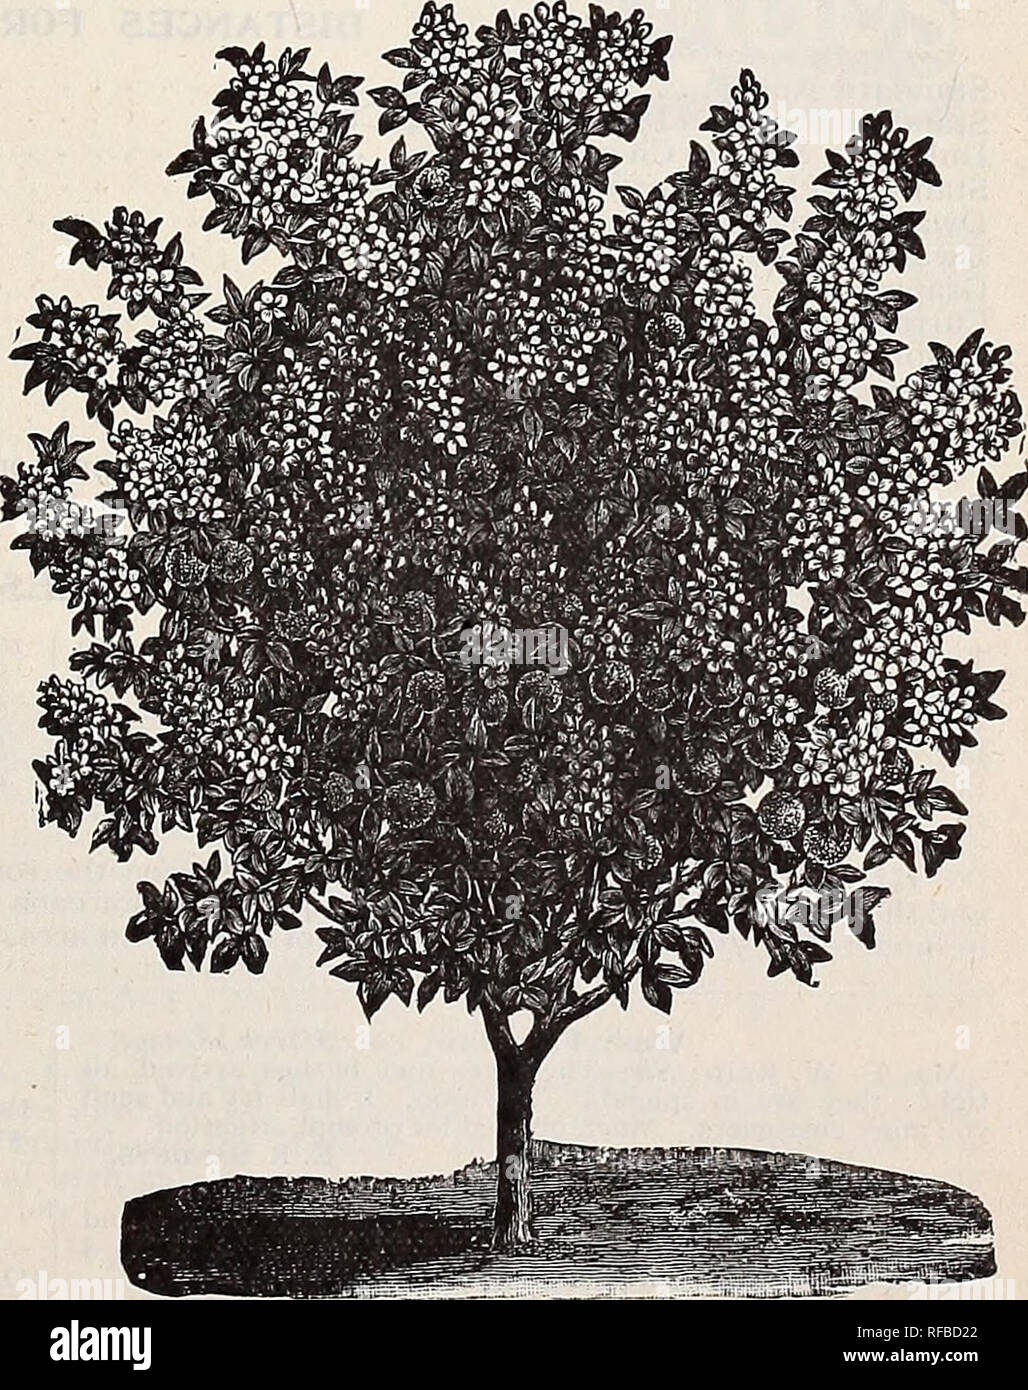 . Catalogue 1894 : everything for the fruit grower. Nurseries (Horticulture) Ohio Bridgeport Catalogs; Fruit trees Seedlings Catalogs; Fruit Catalogs; Nut trees Seedlings Catalogs; Trees Seedlings Catalogs; Flowers Catalogs. ELEAGNUS LONGIPES. ELEAQNUS LONGIPES. This new and valuable acquisition, a native of Japan, is one of our most promising new fruits, and we highly recommend it for more general planting. It is worthy a place in both fruit and ornamental collections, as its beautiful shape as a shrub, with its dark green foliage, makes it a very conspicuous sight, especially when loaded wit Stock Photo